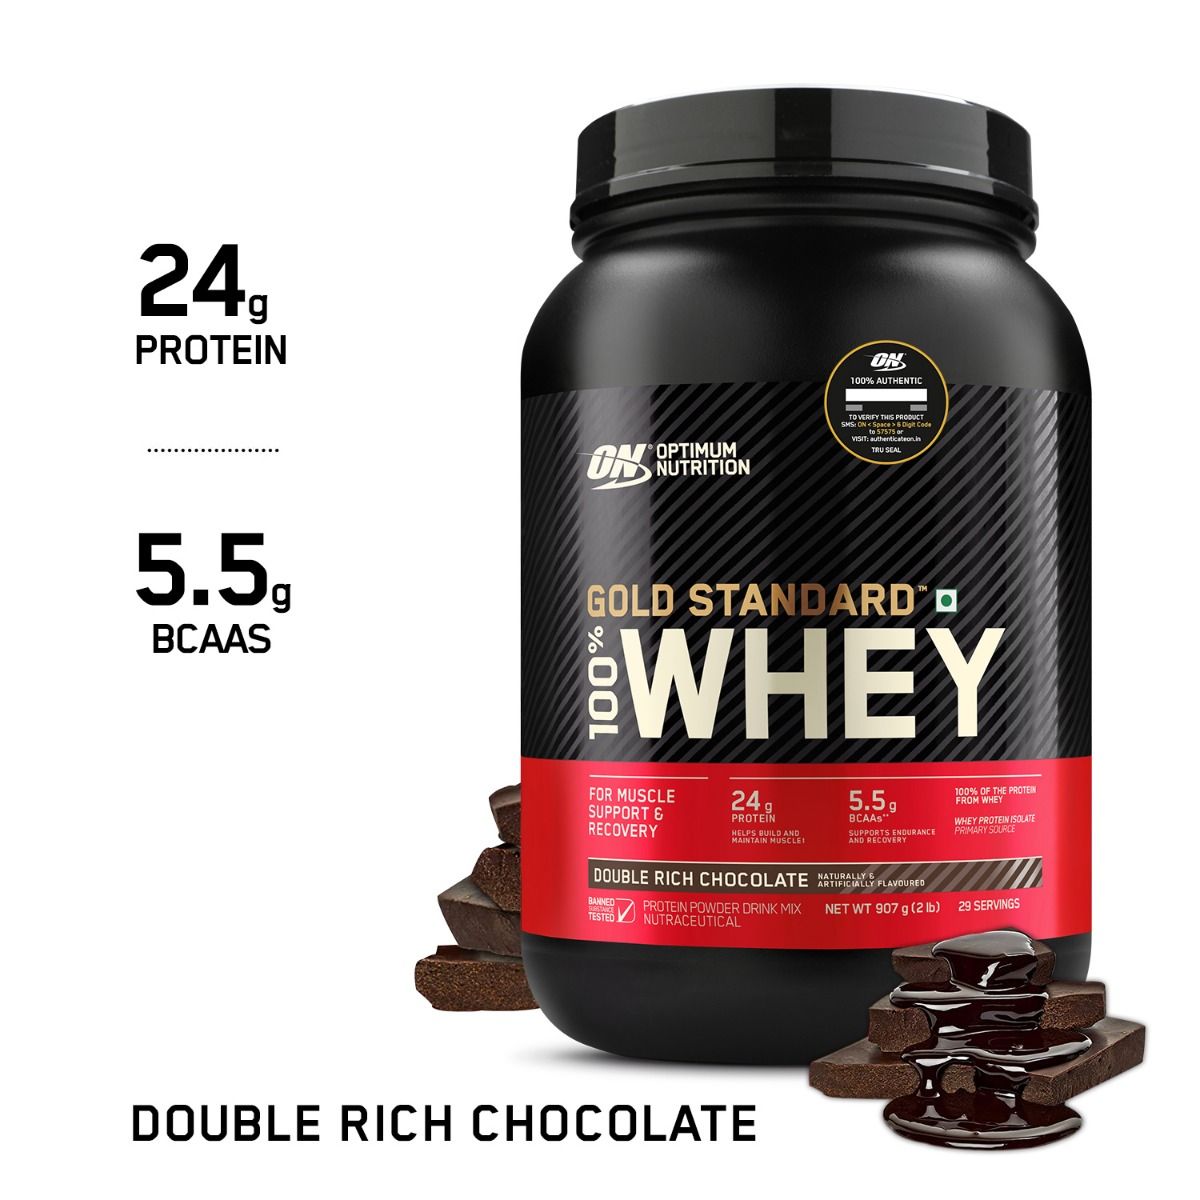 Optimum Nutrition (ON) Gold Standard 100% Whey Protein Double Rich Chocolate Flavour Powder, 2 lb, Pack of 1 